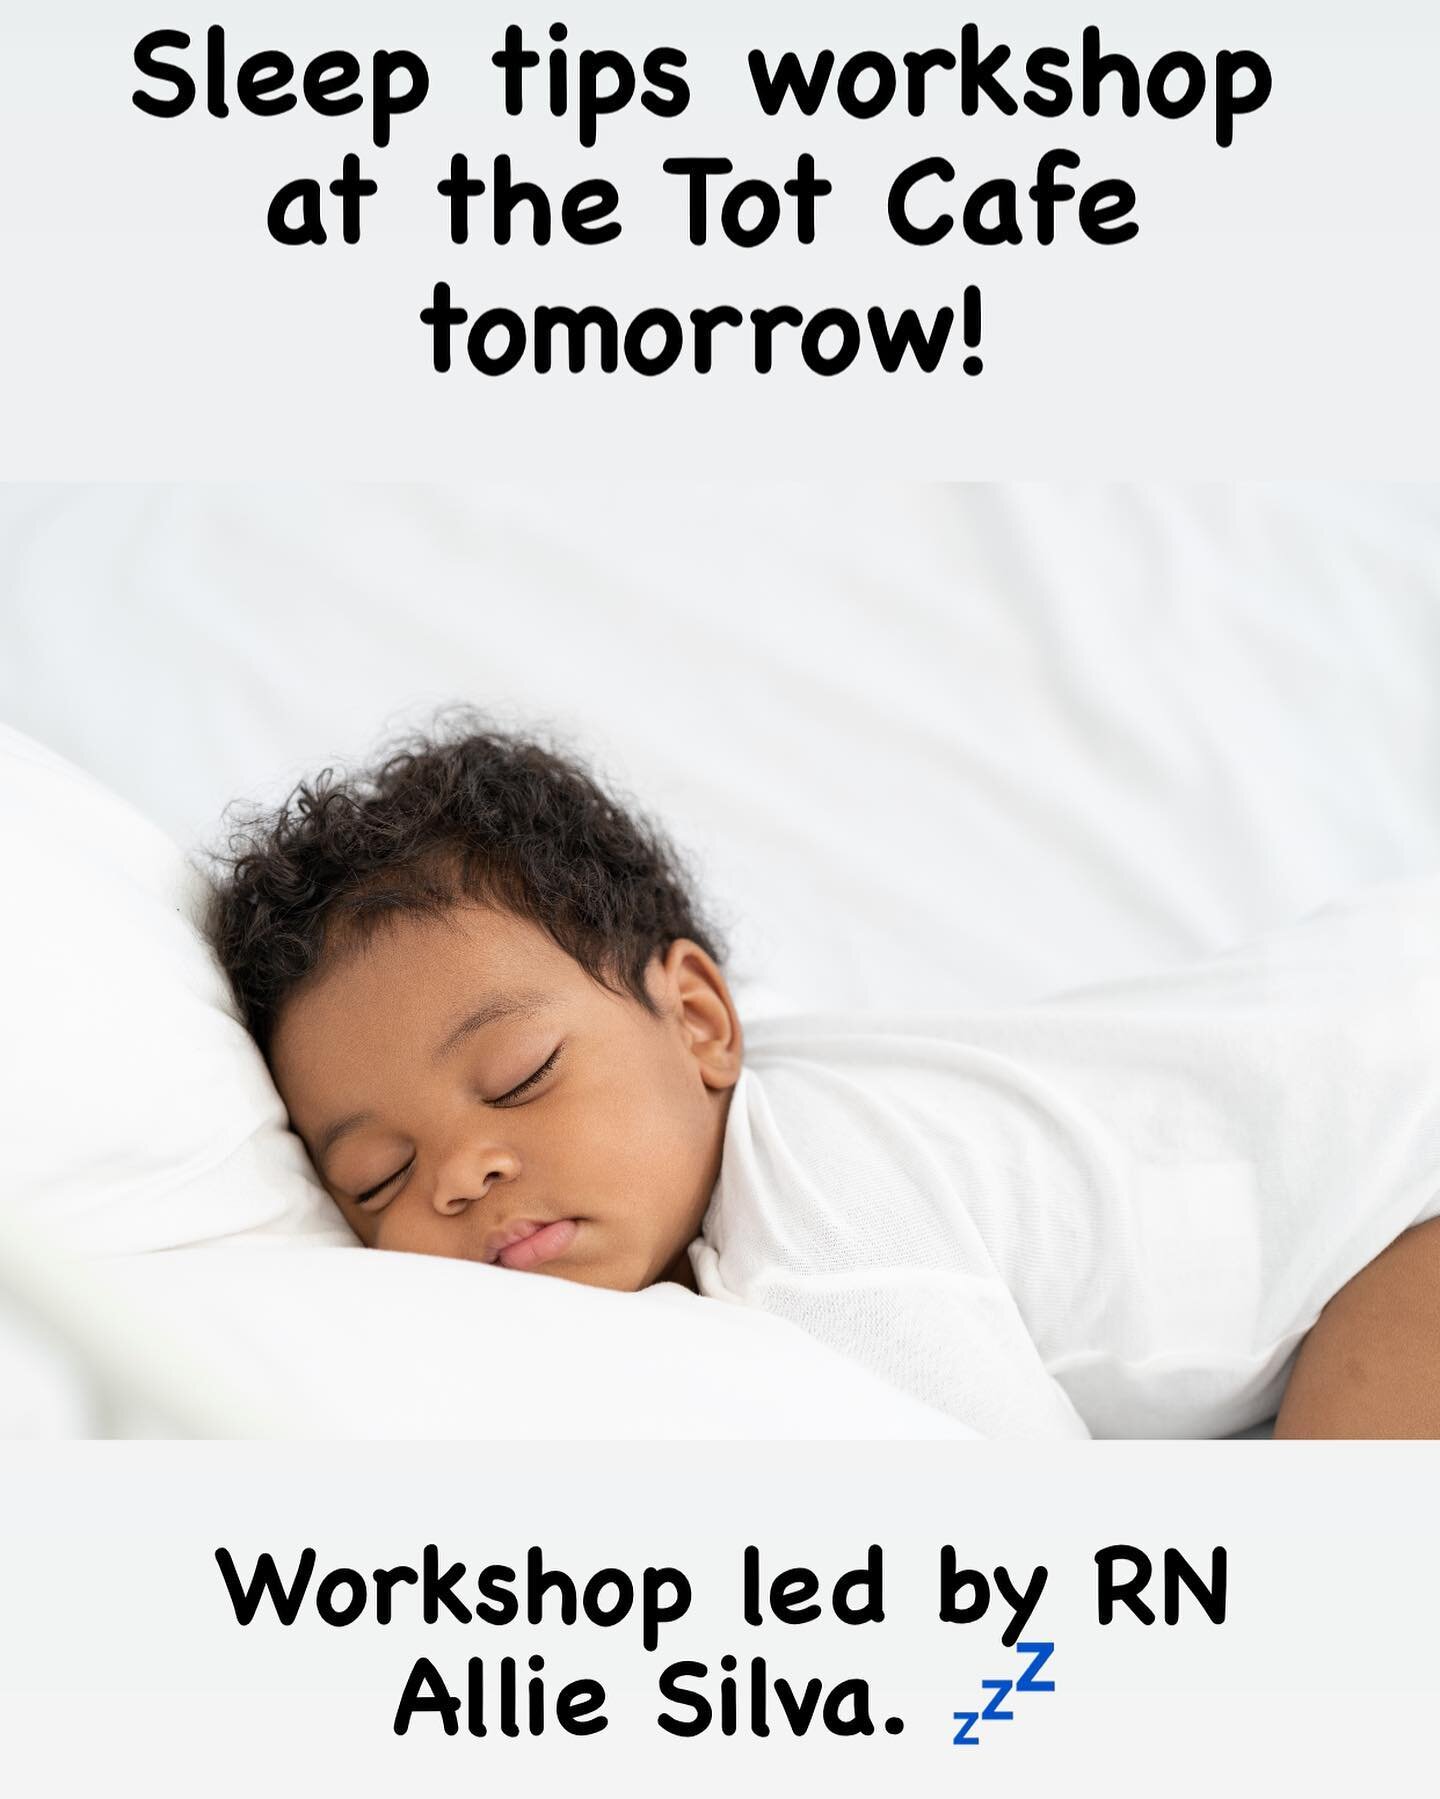 If you aren&rsquo;t sleeping like this each night, join us tomorrow (March 22nd) at The Tot Cafe for a morning of awesome education with Allie Silva, Registered Nurse and Mama Coach. 

T�his workshop is best suited for age Newborn - 18 months

D�urin